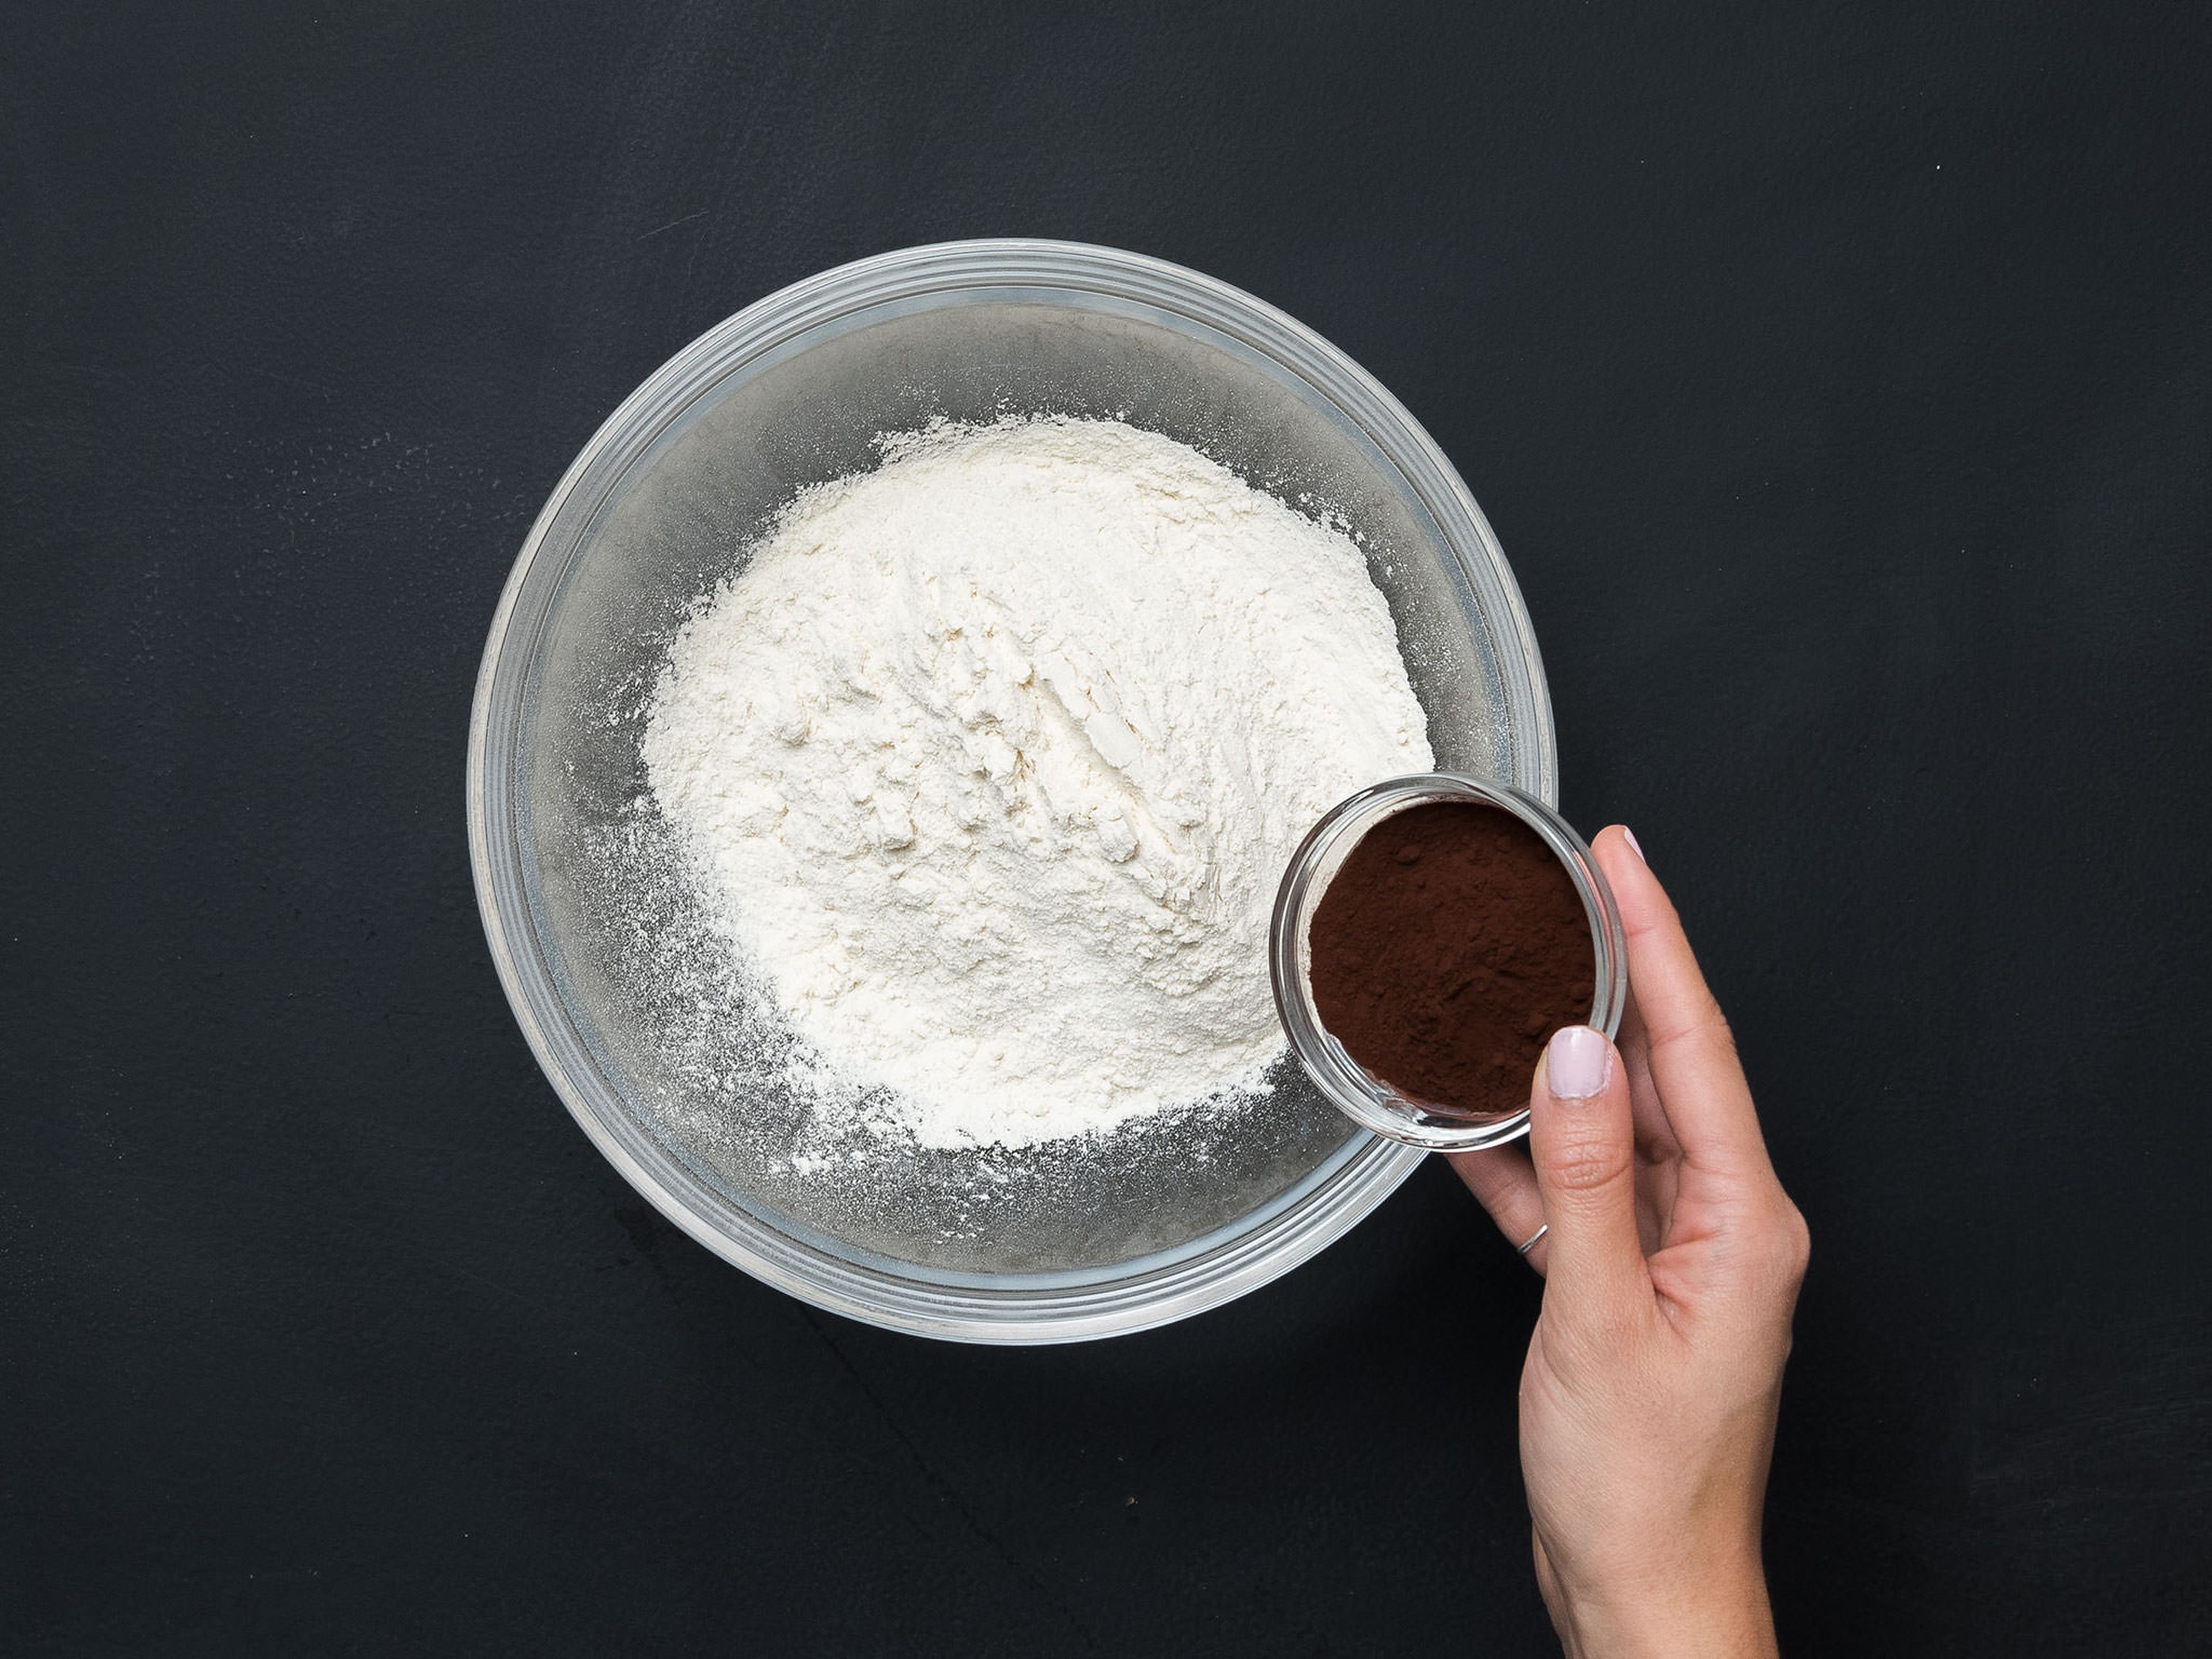 For the black dough, mix together flour and cocoa powder. Mix cold margarine with sugar, then add the flour mixture and water. Knead, adding water if needed, until a dough is formed. Wrap in plastic and transfer to the refrigerator for approx. 10 min.